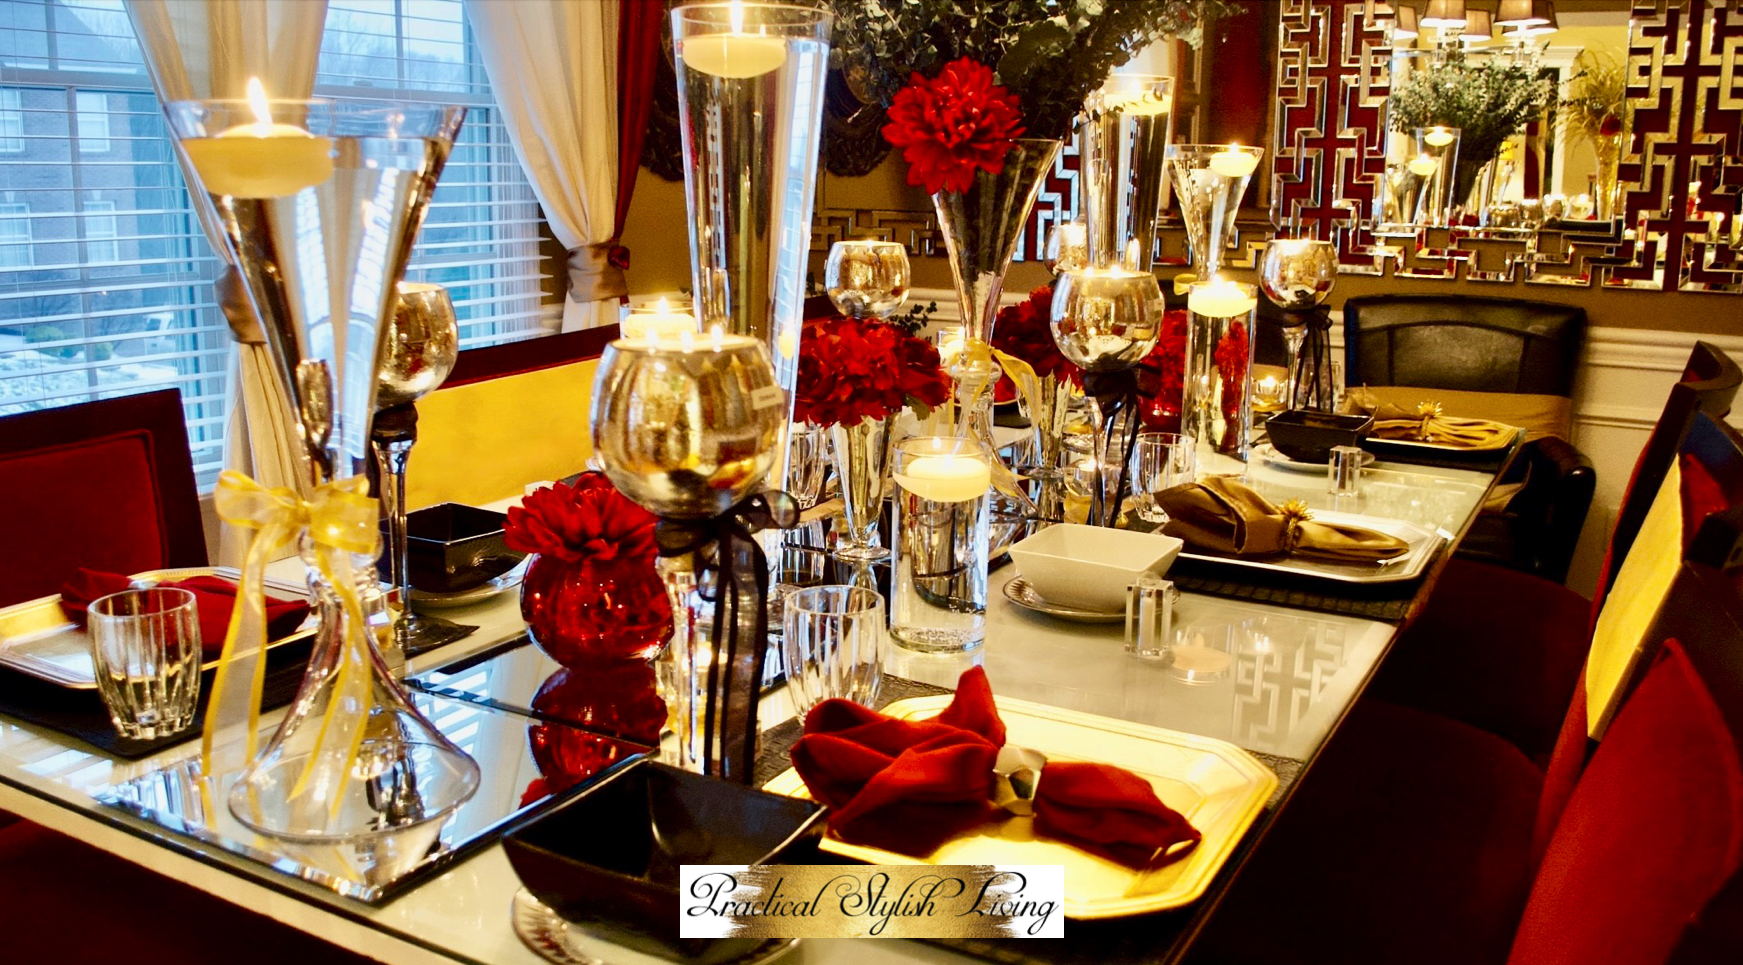  Stylish Table Setting Ideas. Red and antique gold table setting with candles